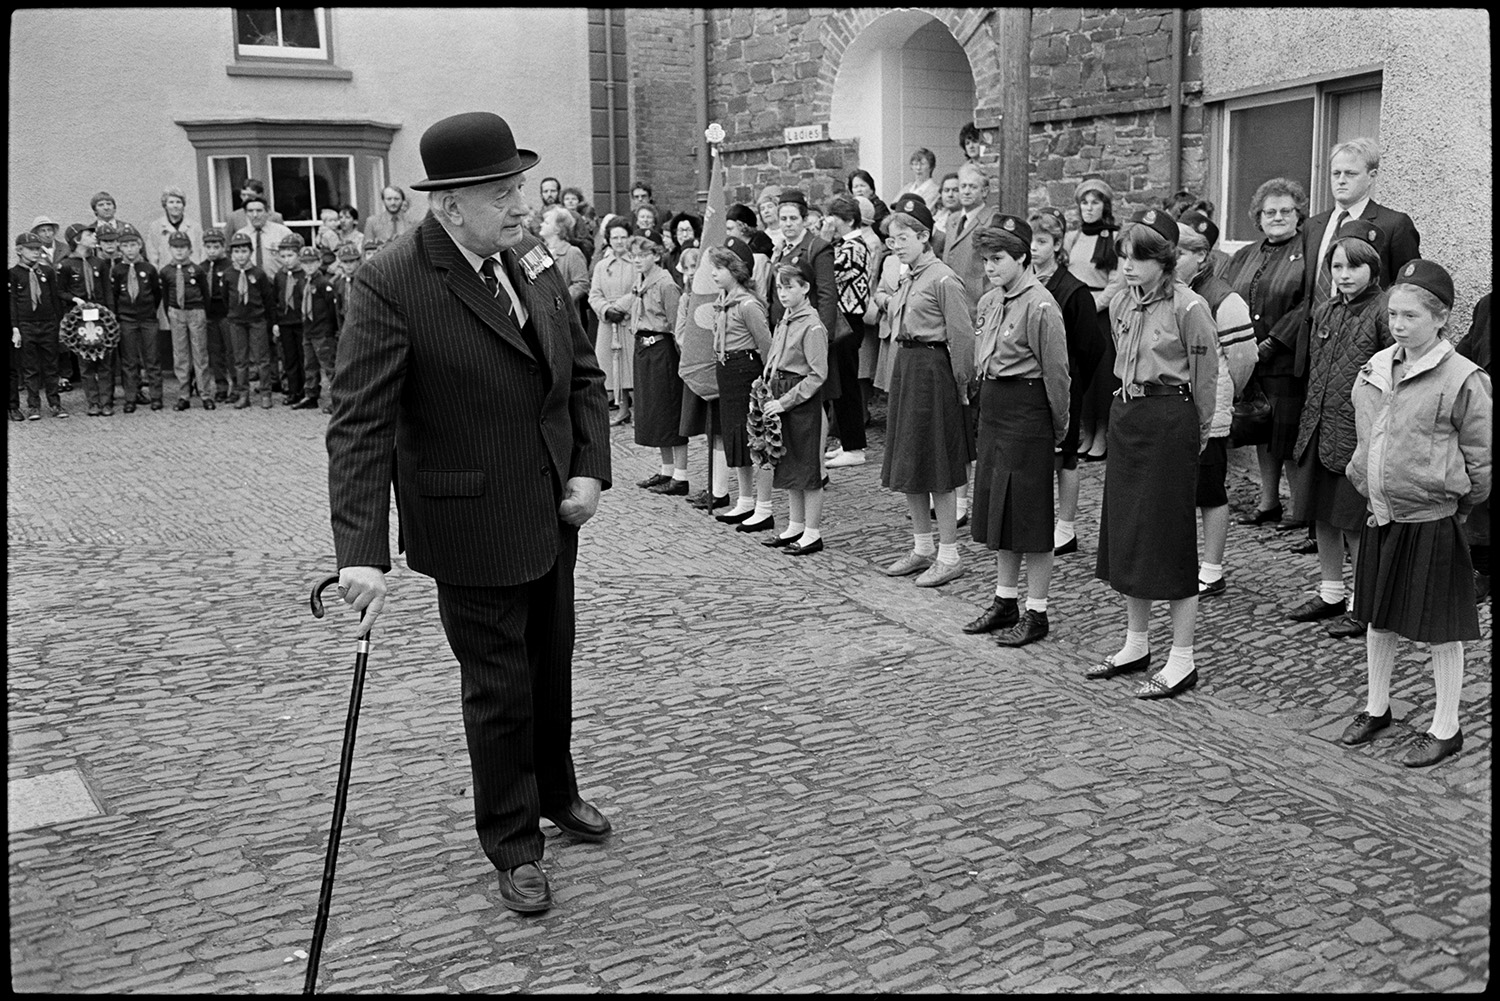 Parade at Memorial, laying wreaths, by men, women and scouts. Vicar saying prayers.
[People assembling for the Remembrance Sunday Parade on the cobbled square in Chulmleigh. One man is inspecting groups of Scouts and Girl Guides. He is wearing a bowler hat, a suit and medals.]